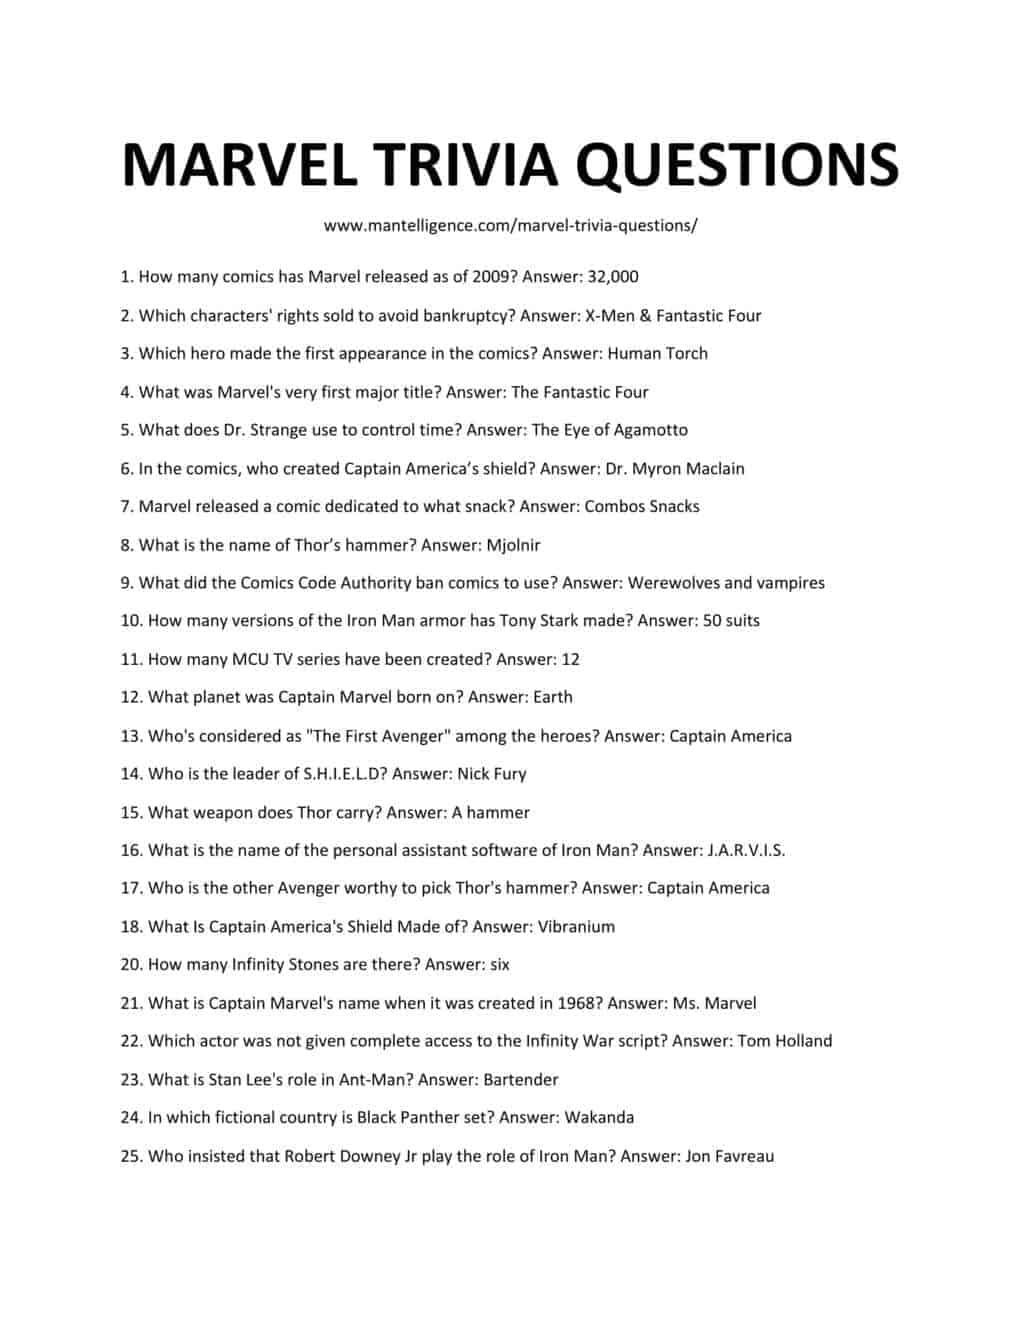 45 Best Marvel Trivia Questions And Answers This Is The List You Need 